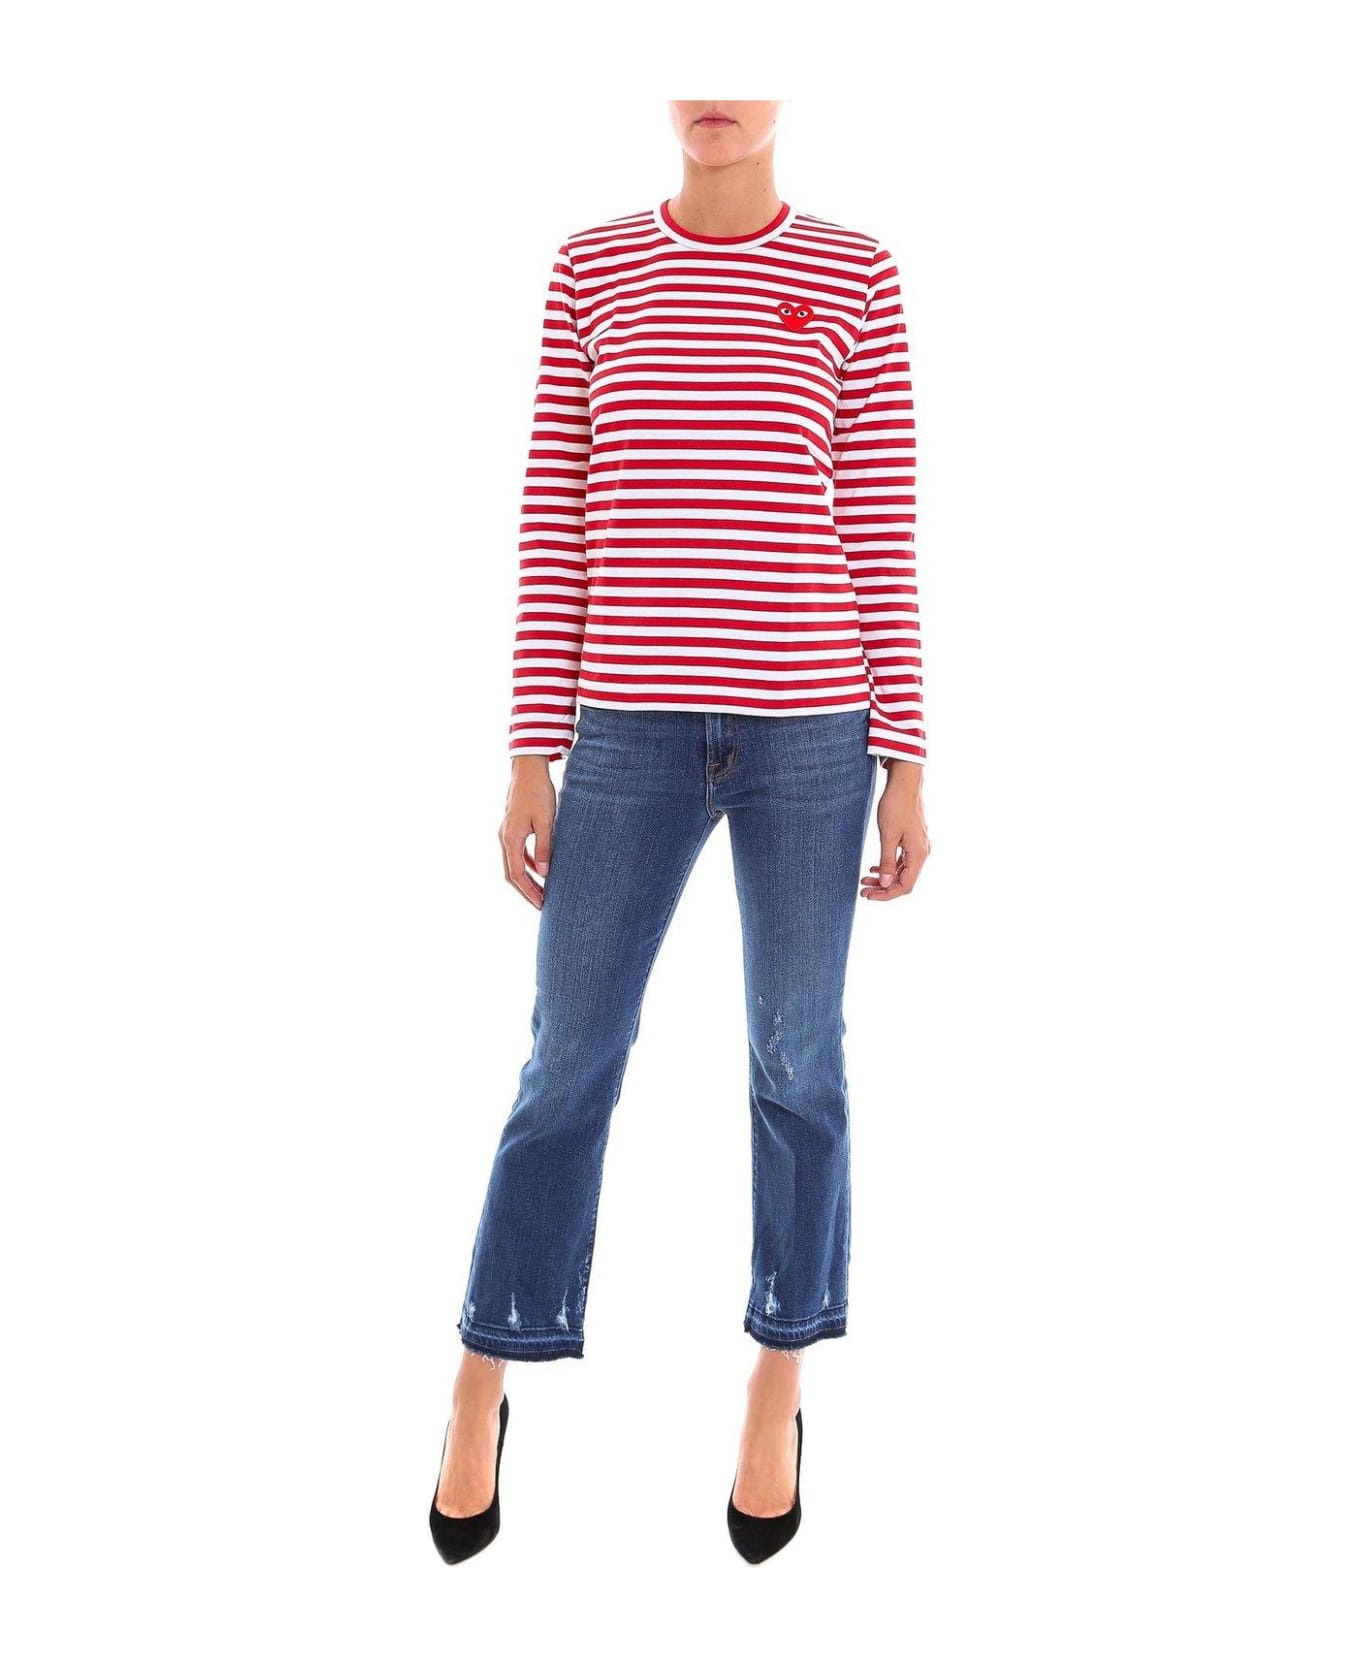 Comme des Garçons Play Striped Long-sleeved T-shirt - Red Tシャツ